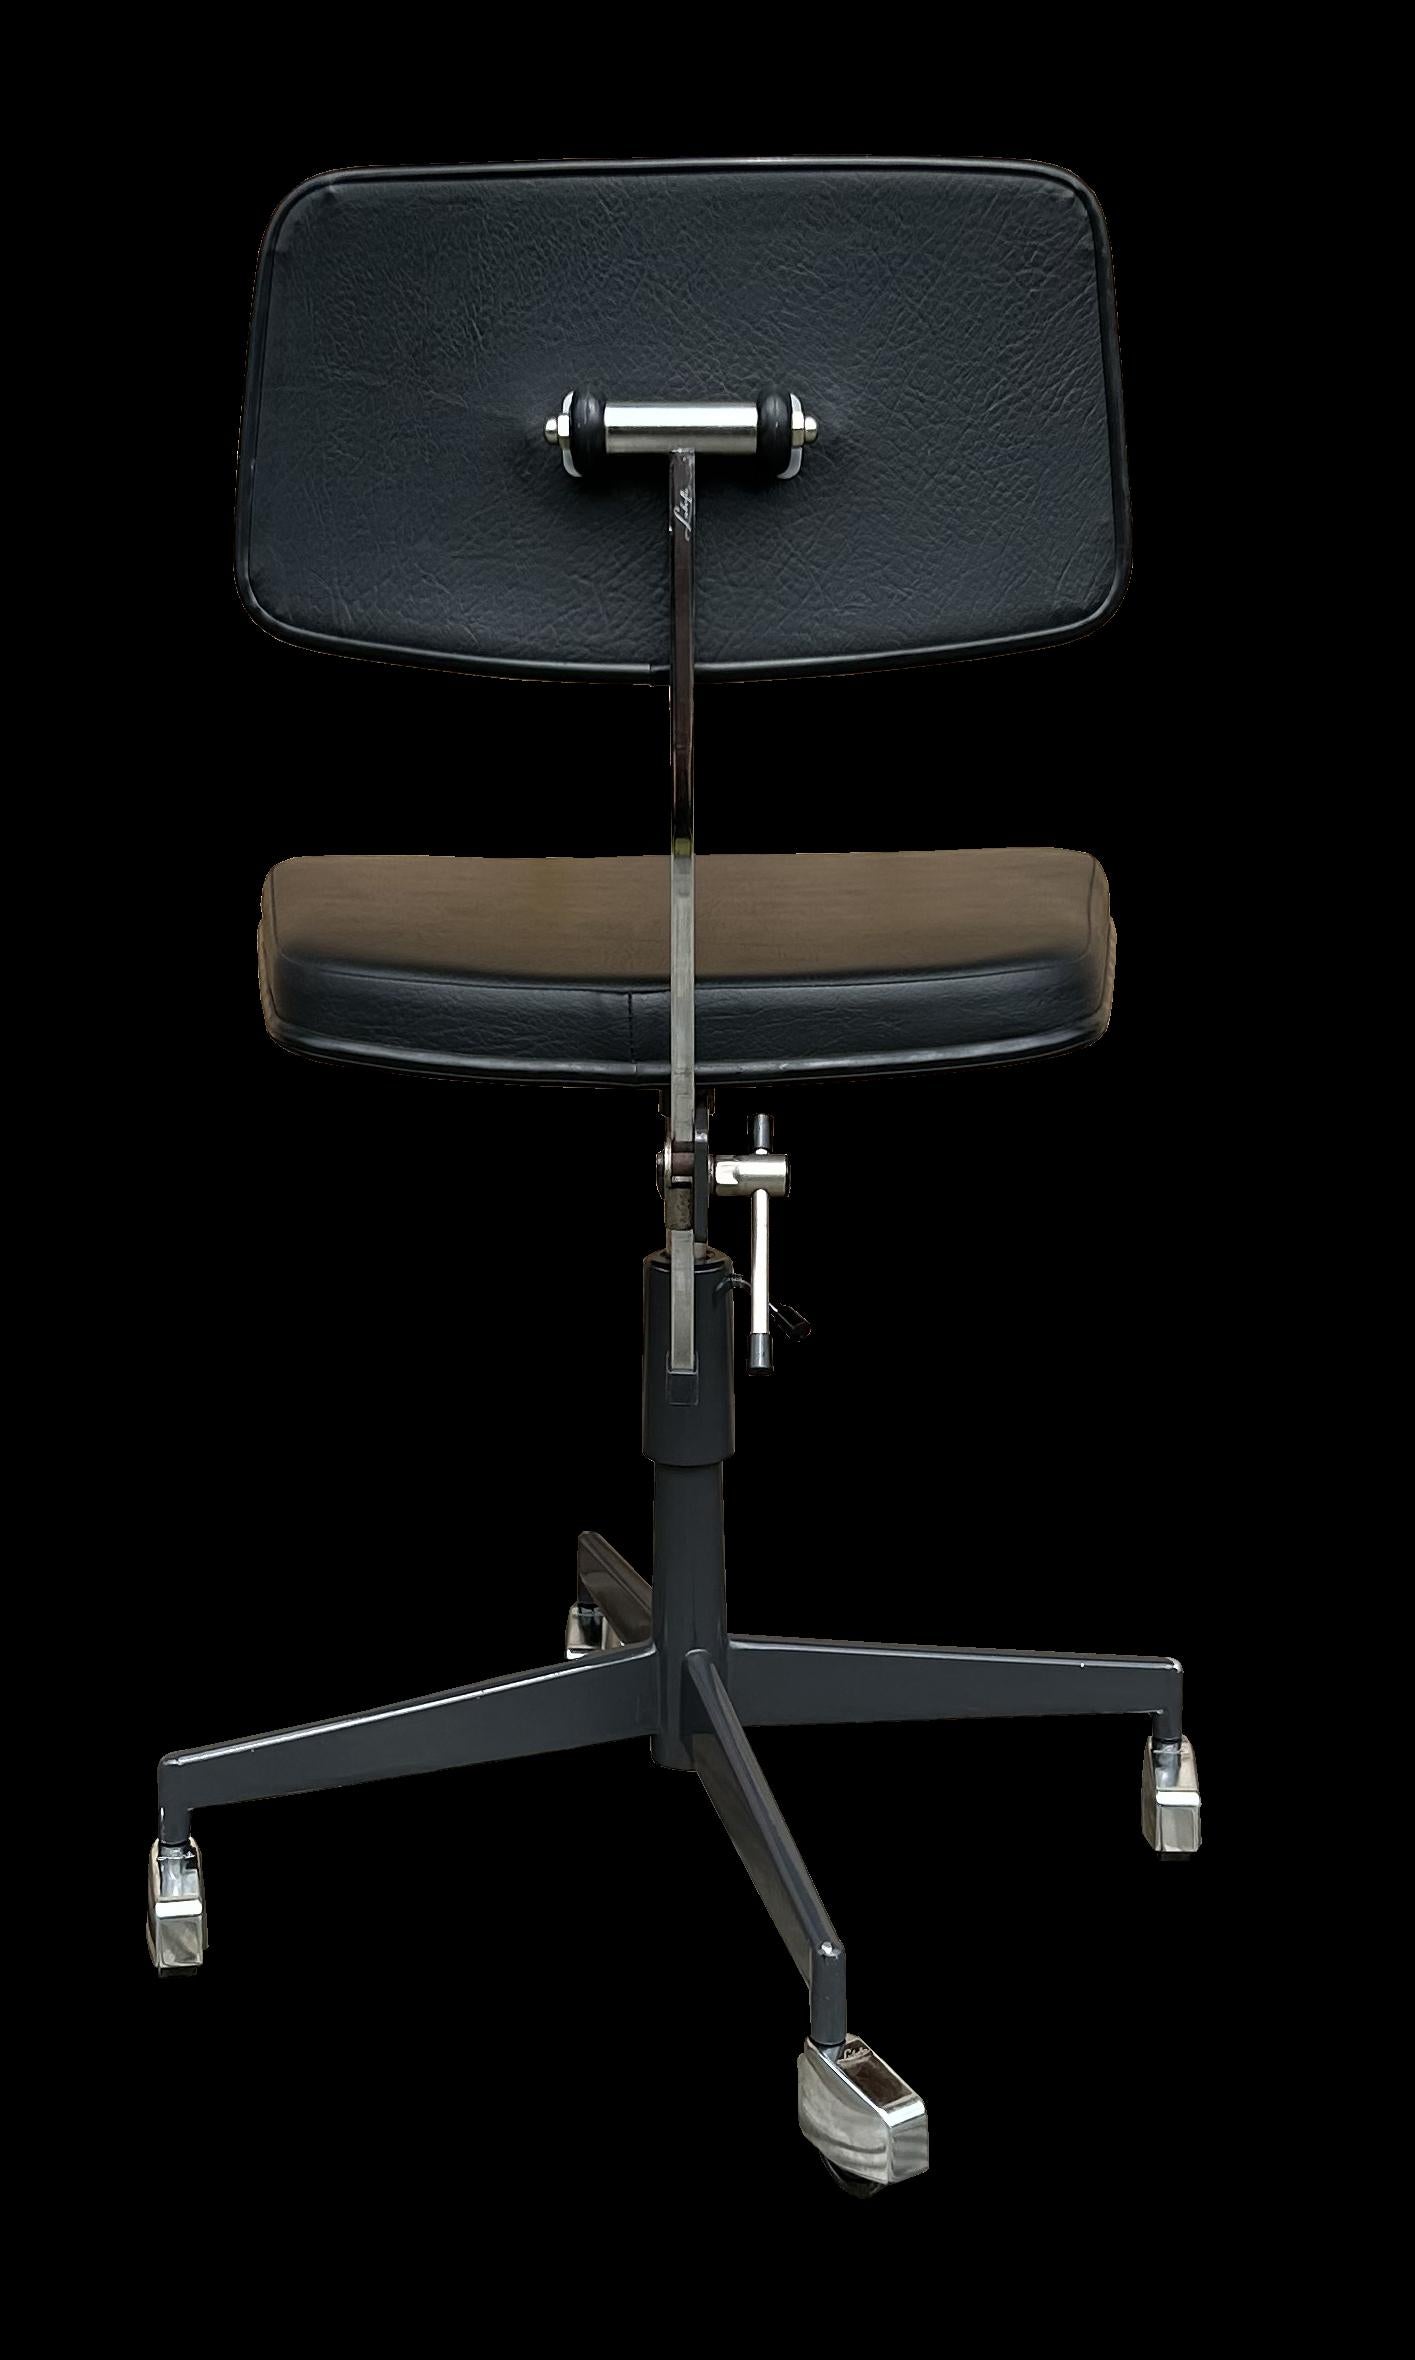 This is a very good original 'Kevi' task/desk chair by Jorgen Rasmussen for Labofa. Adjustable height and swivelling, it's a great chair for your home office.
Seat Height at its lowest is 44 cm and 56 cm at its highest.